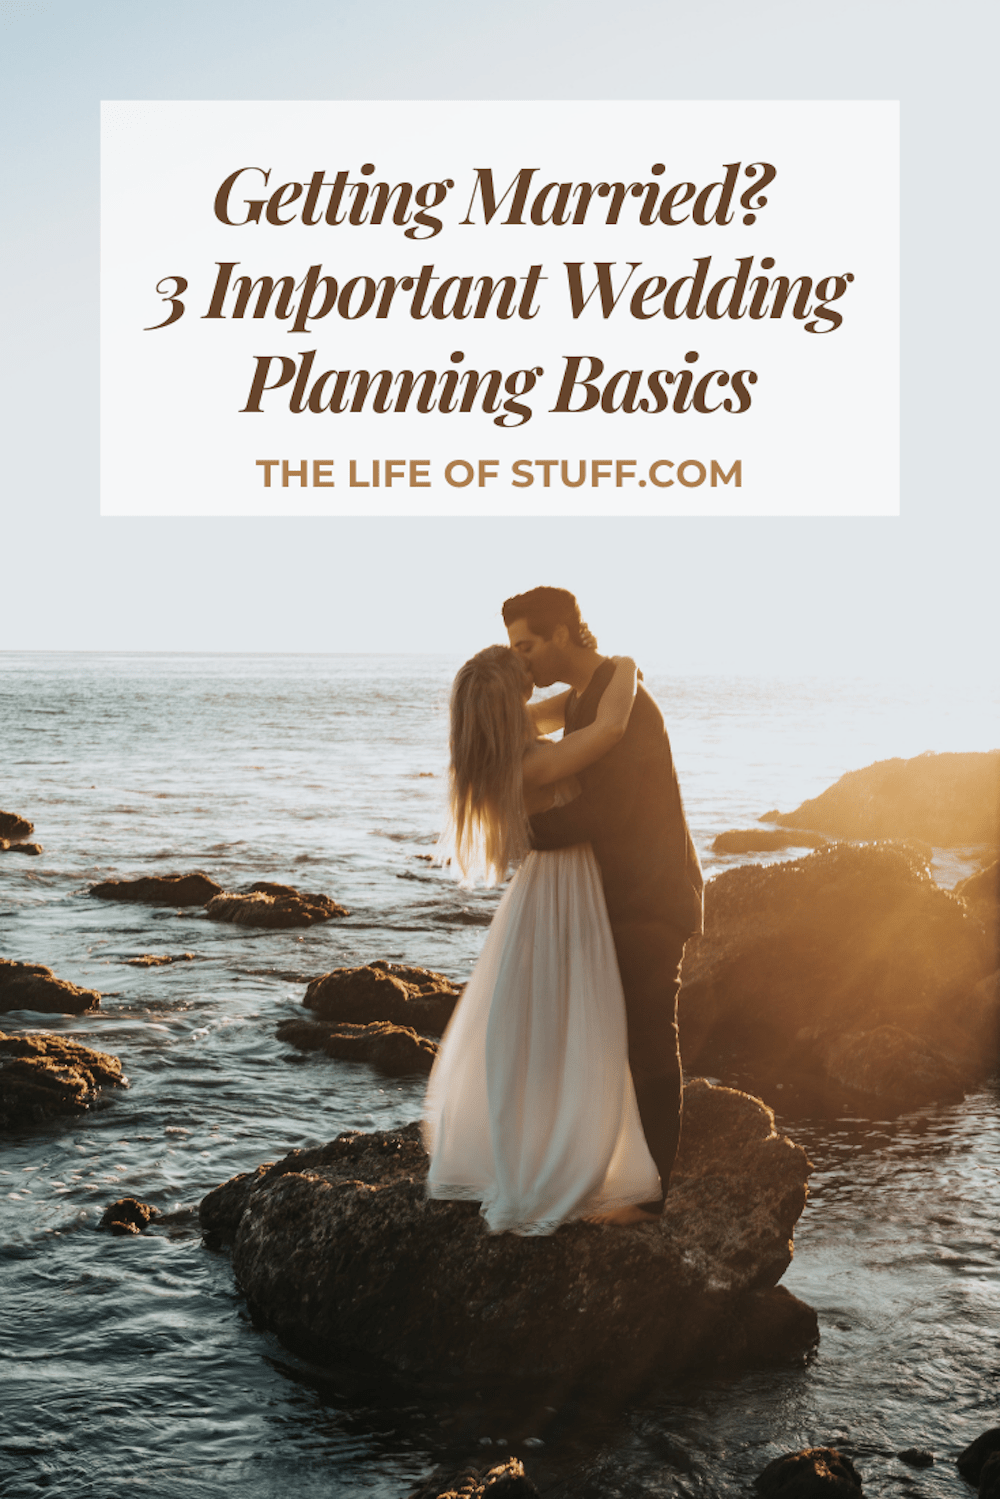 Getting Married? 3 Important Wedding Planning Basics - The Life of Stuff